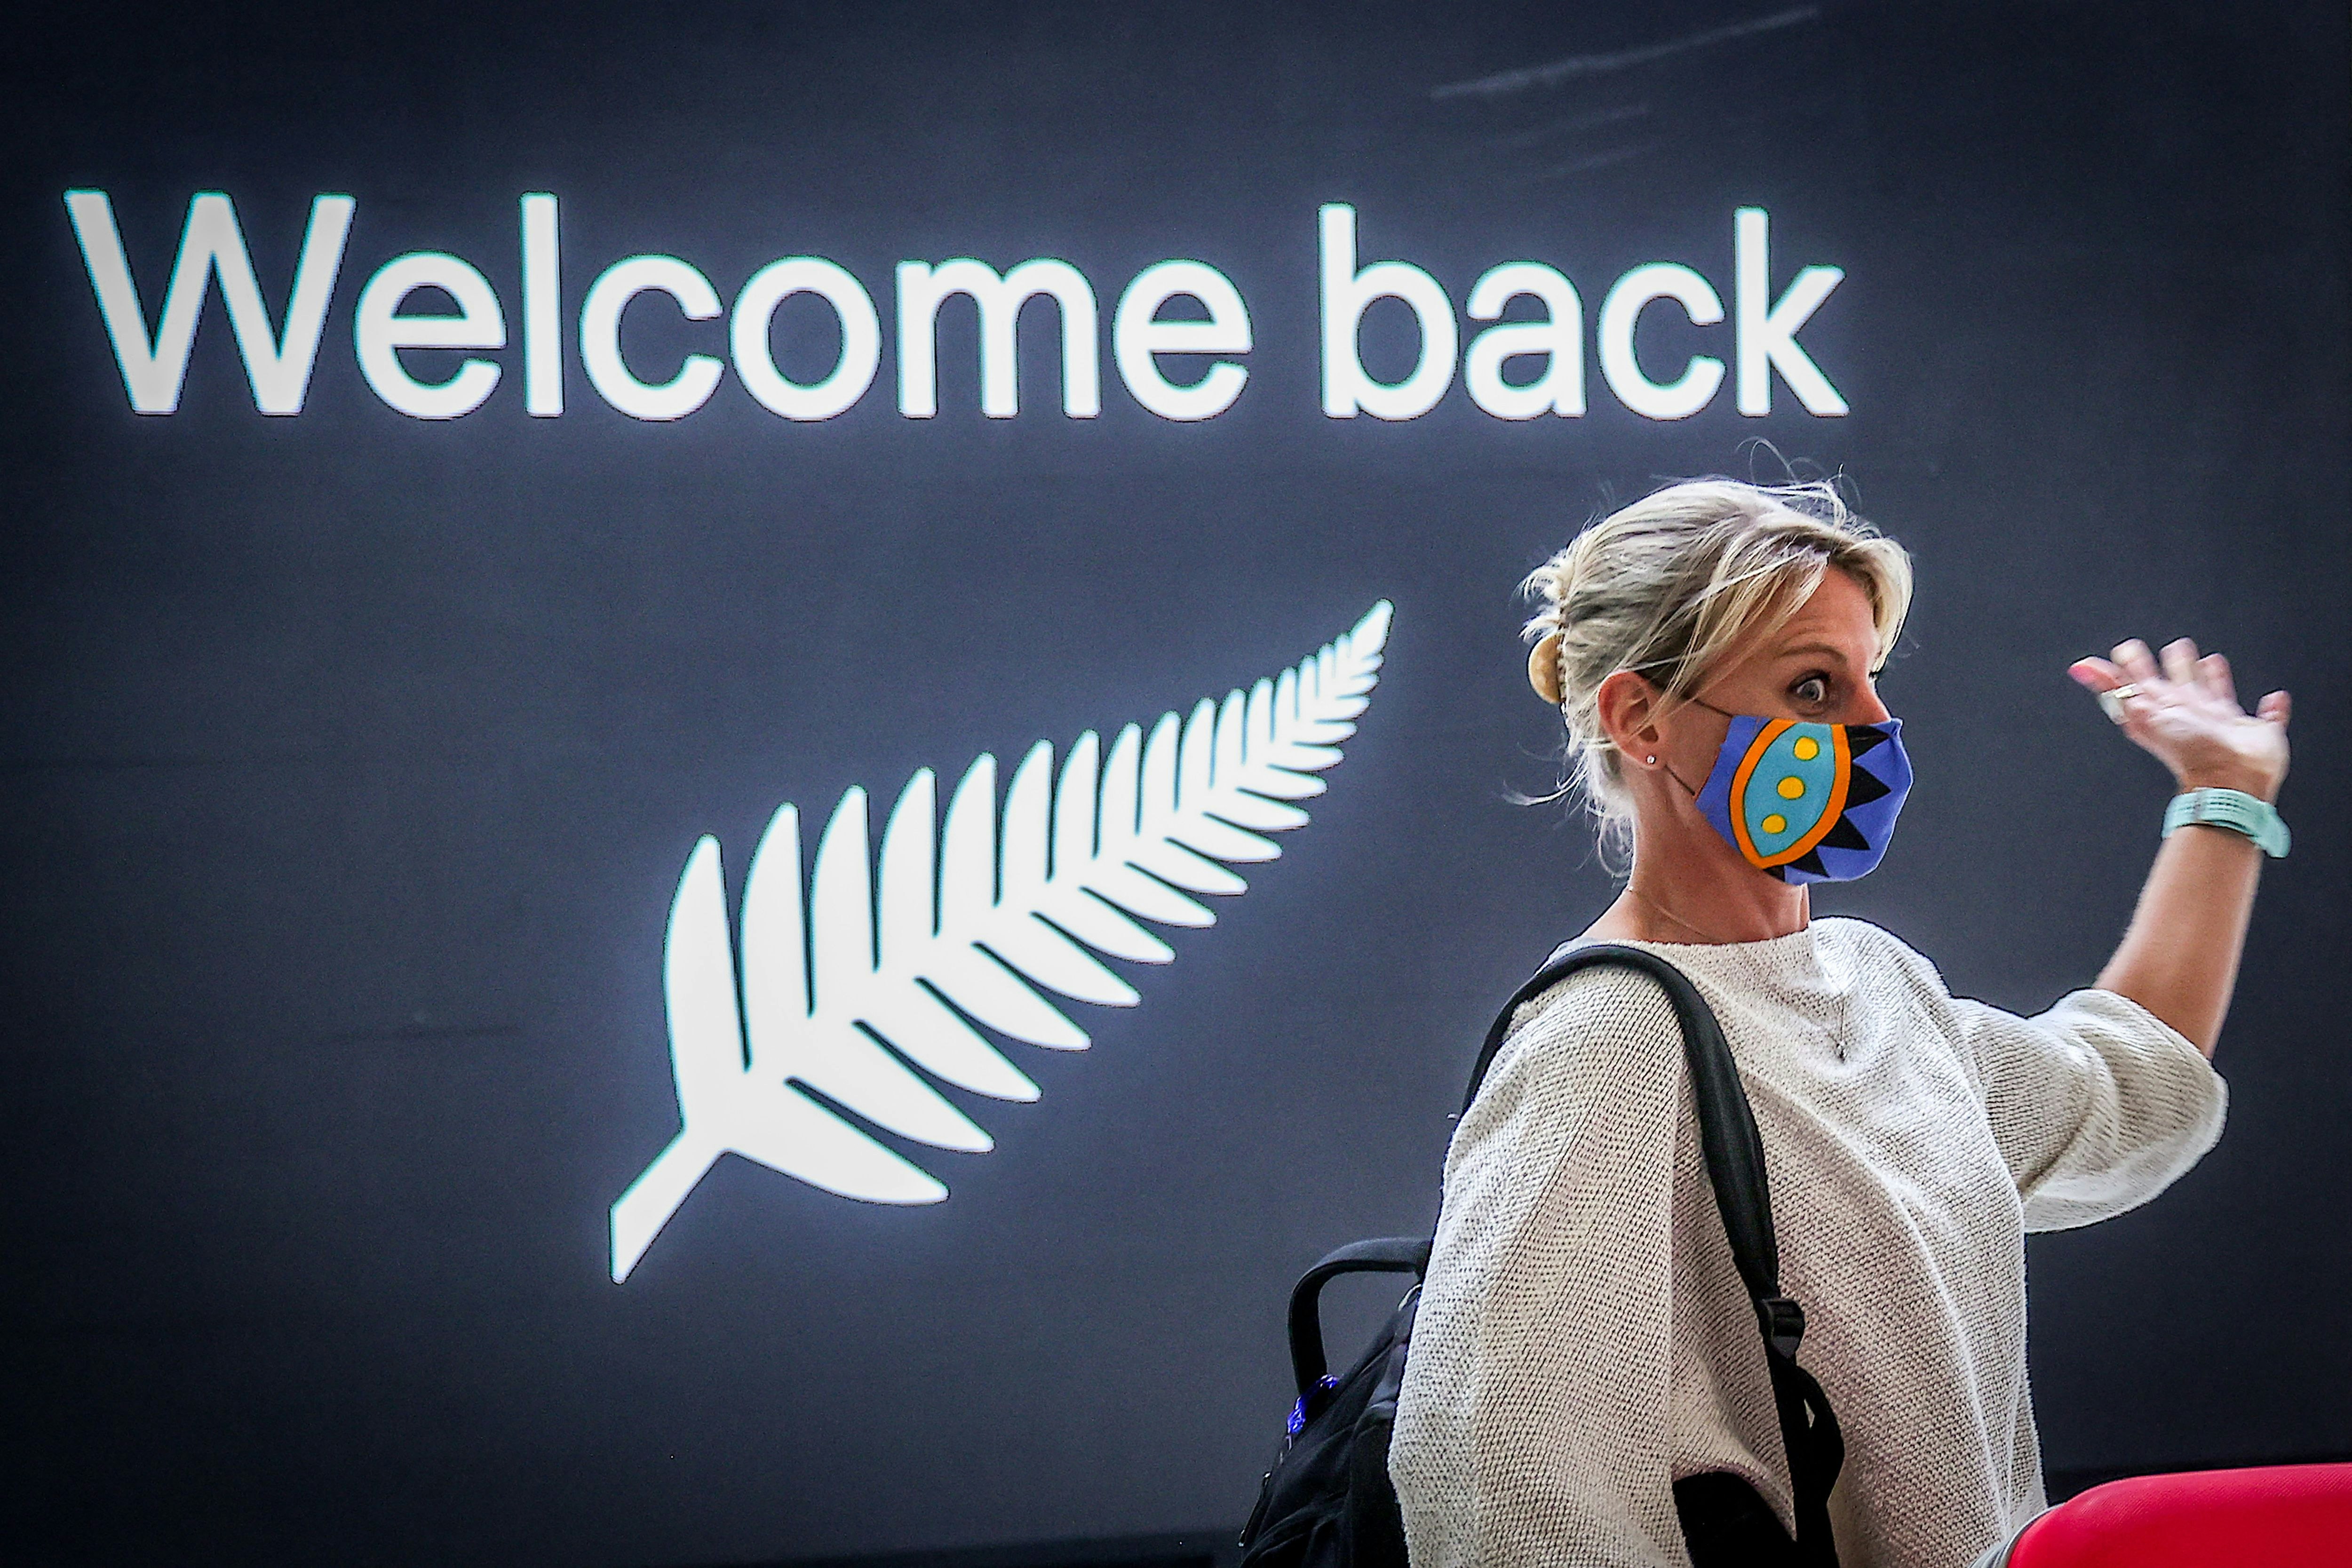 A passenger reacts upon arrival from New Zealand at Sydney International Airport on October 16, 2020, after Australias border rules were relaxed under a new one-way trans-Tasman travel agreement that allow travellers from New Zealand to visit New South Wales without having to quarantine amid the Covid-19 coronavirus pandemic. (Photo by DAVID GRAY / AFP) (Photo by DAVID GRAY/AFP via Getty Images)